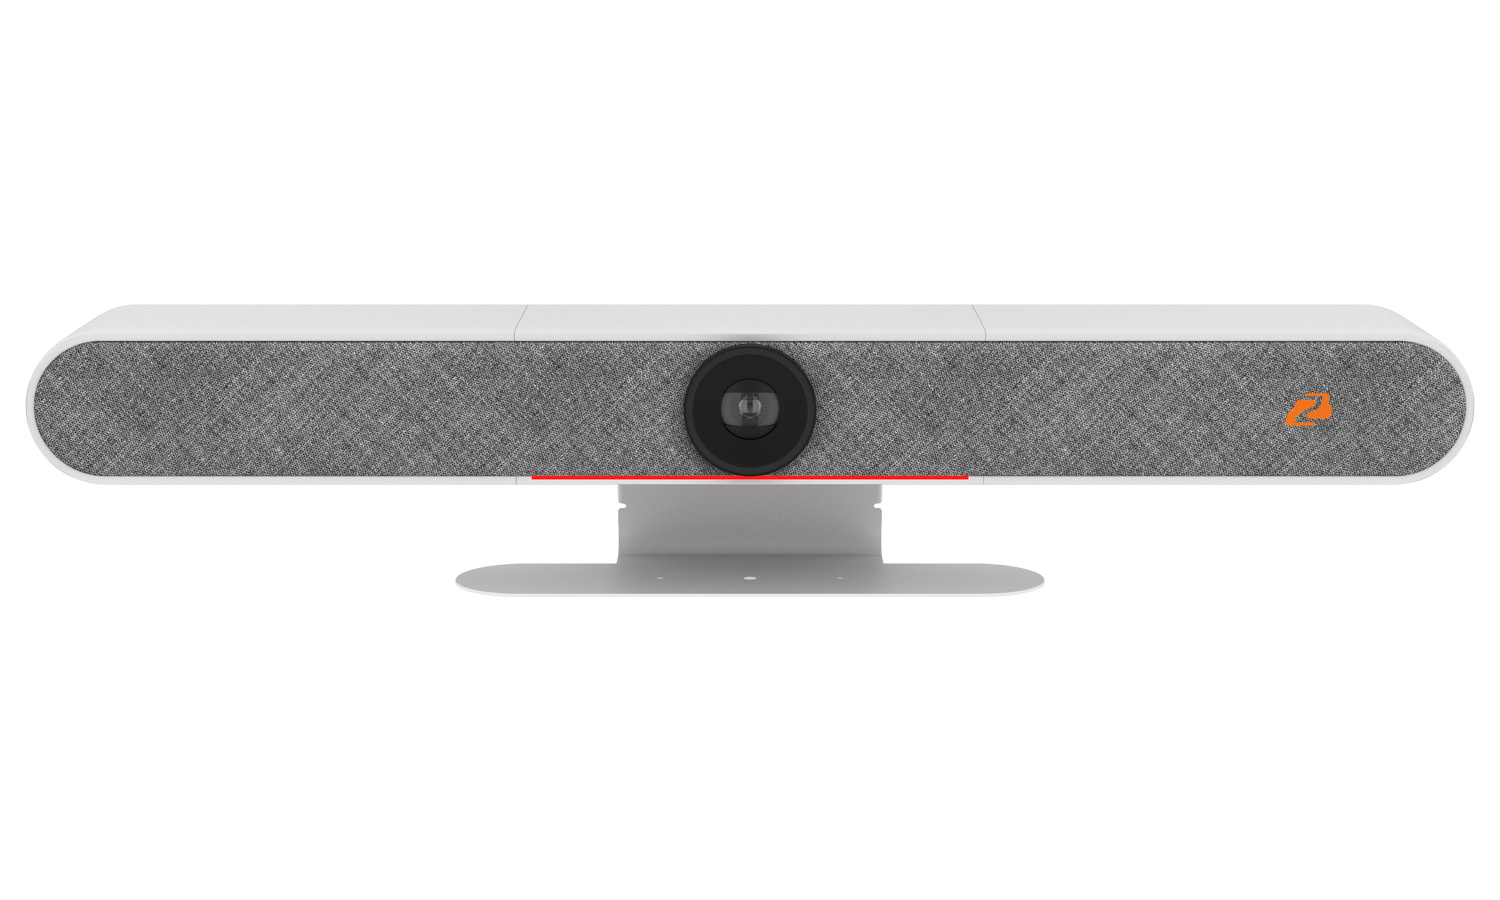 BG-CYCLOPS-4K-W Intelligent 4K UHD Auto Tracking/Framing Video Bar with HDMI/USB-C and 20W Speakers/6-MEMS Microphones (White) by BZBGEAR